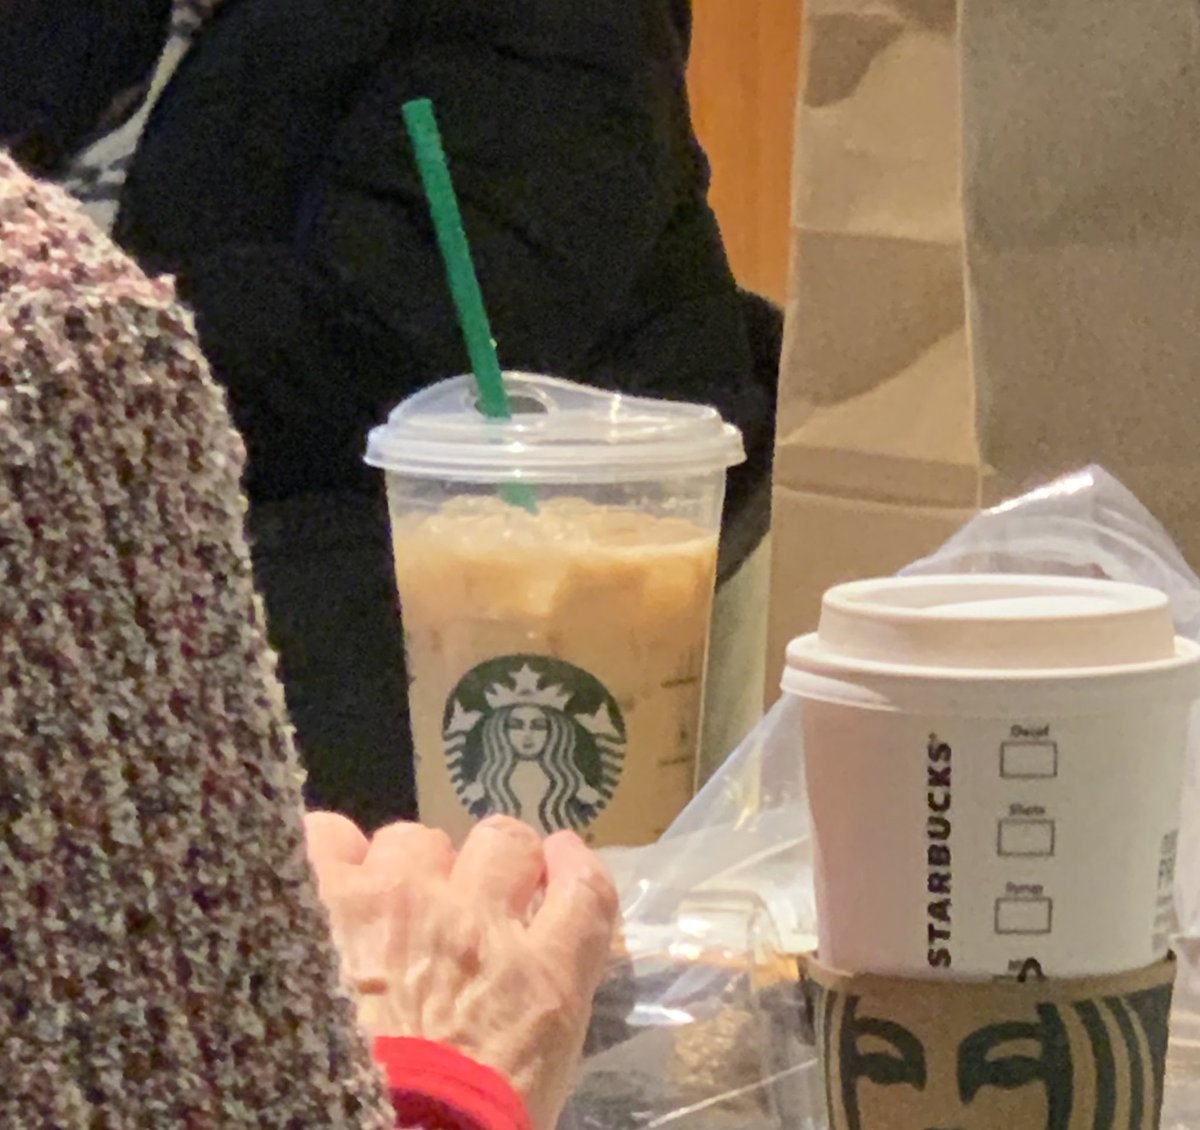 Spotted: rebel using plastic straw through the Starbucks sippy cup lid that’s supposed to prevent the use of plastic straws. 🤷🏻‍♀️😂 #StrawBan #SuckItAbleism